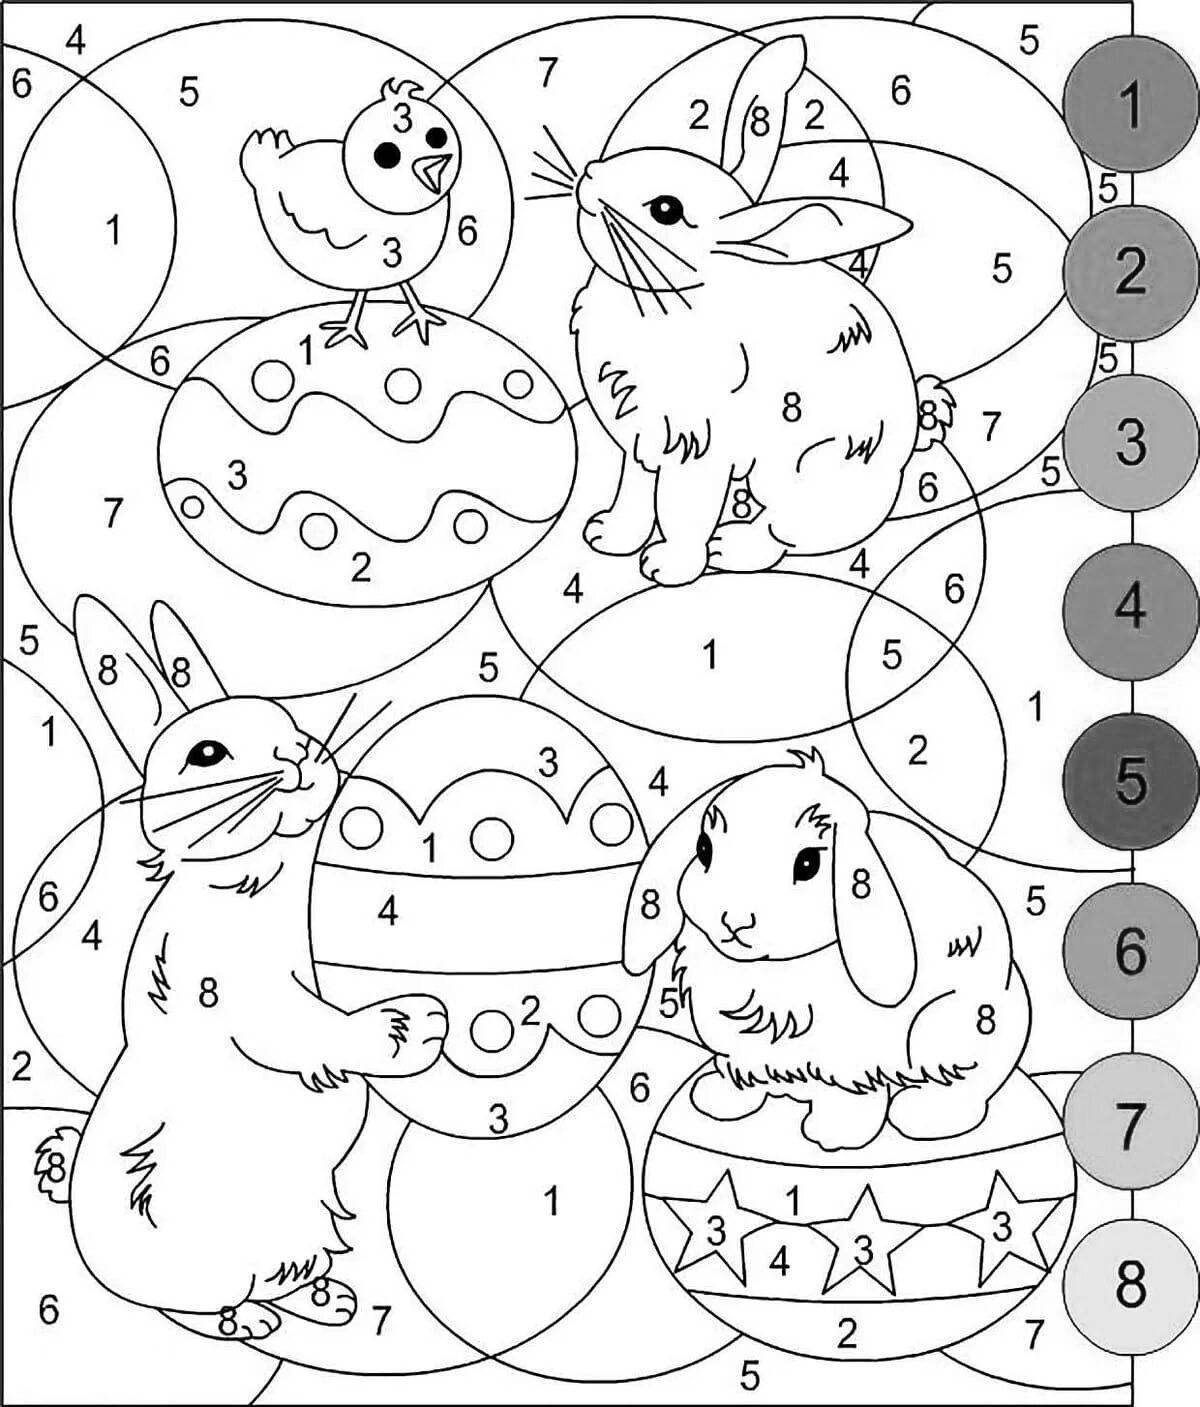 Playful license plate coloring page